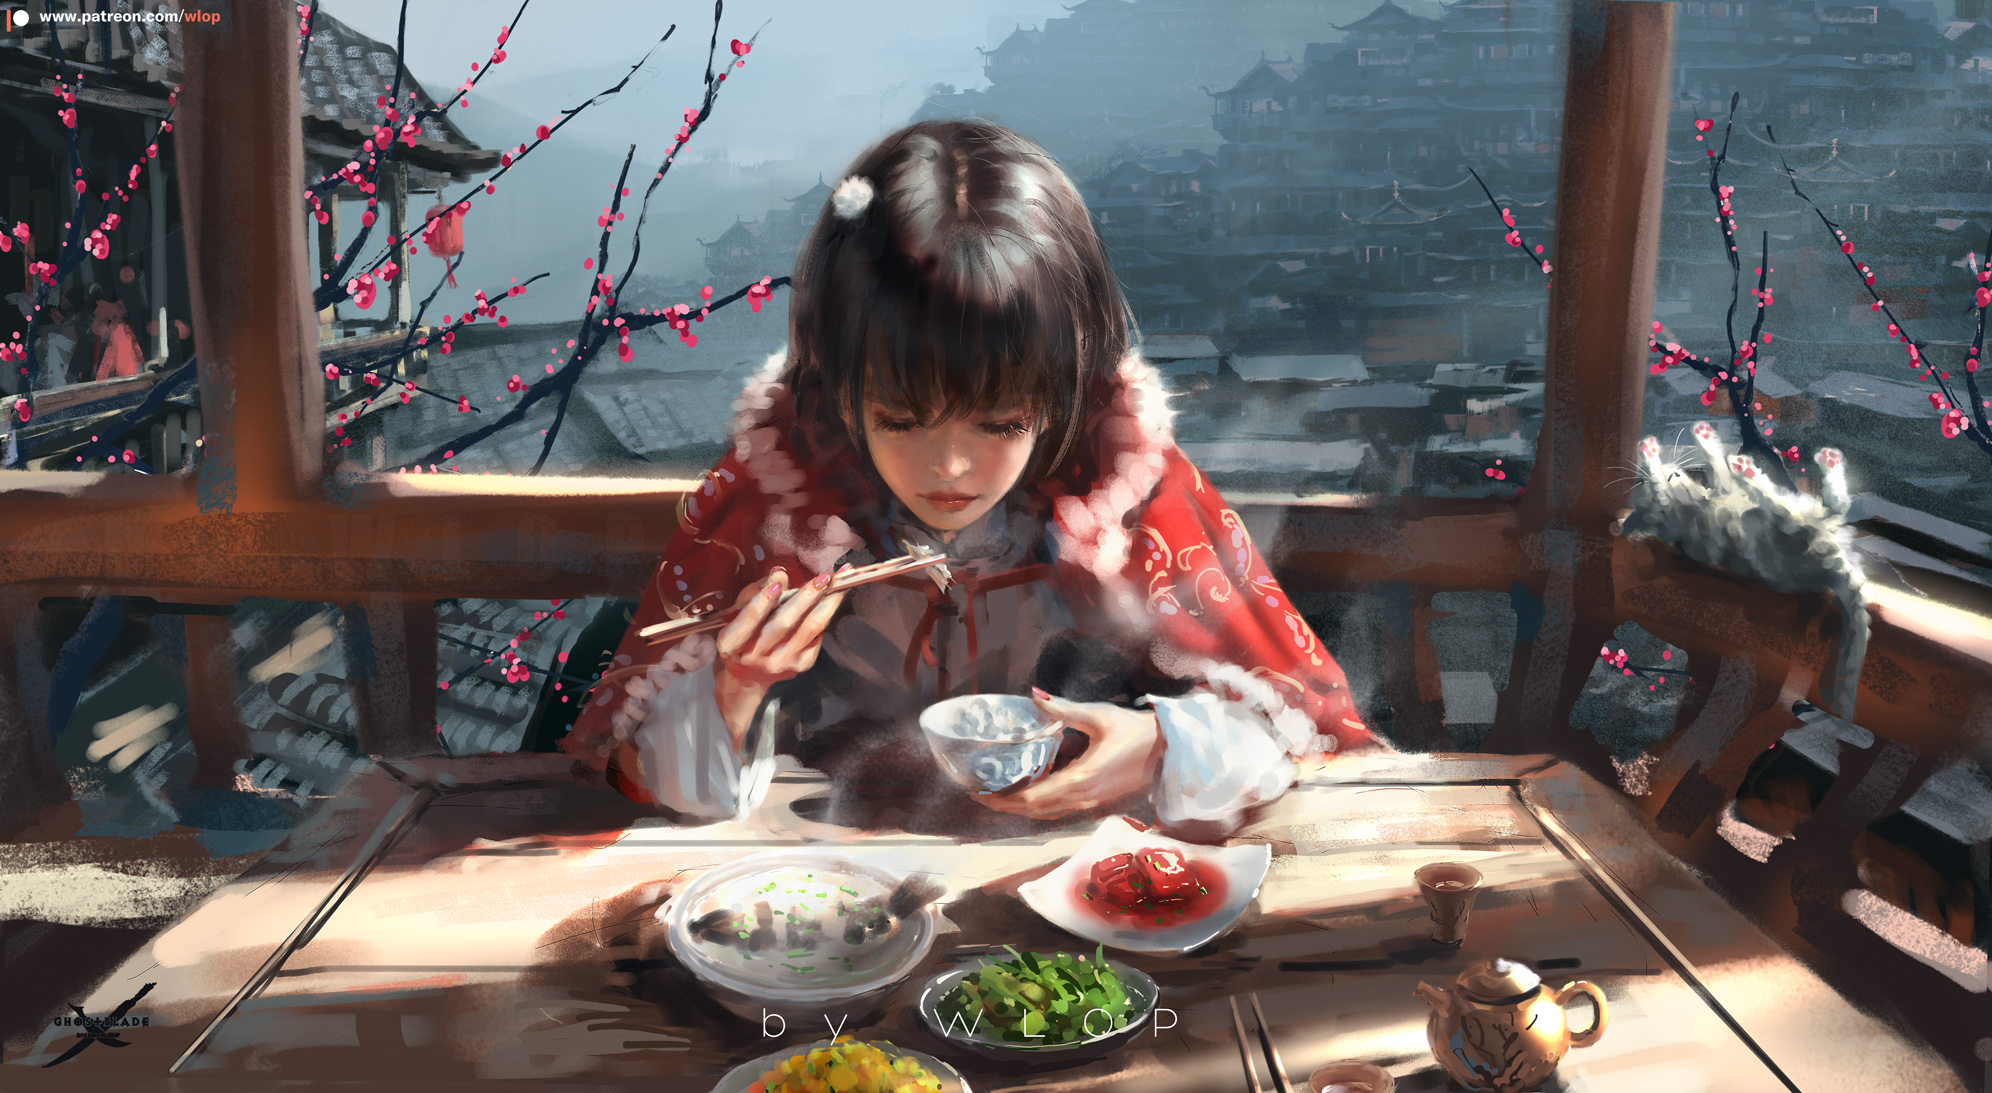 Spring Festival by Wang Ling